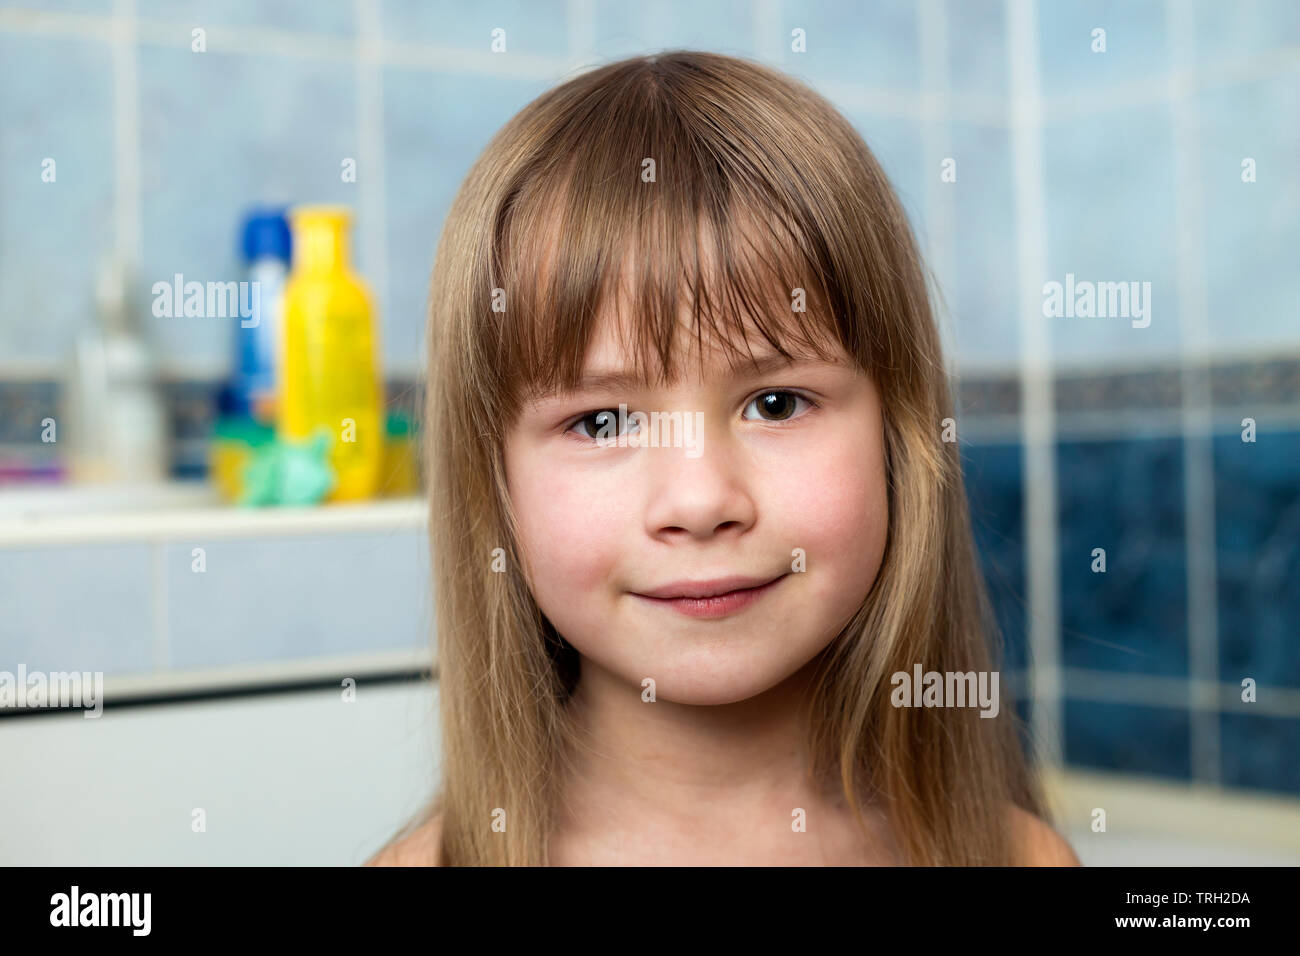 Pretty girl face portrait, smiling child with beautiful eyes and long wet fair hair on blurred background of bathroom. Stock Photo